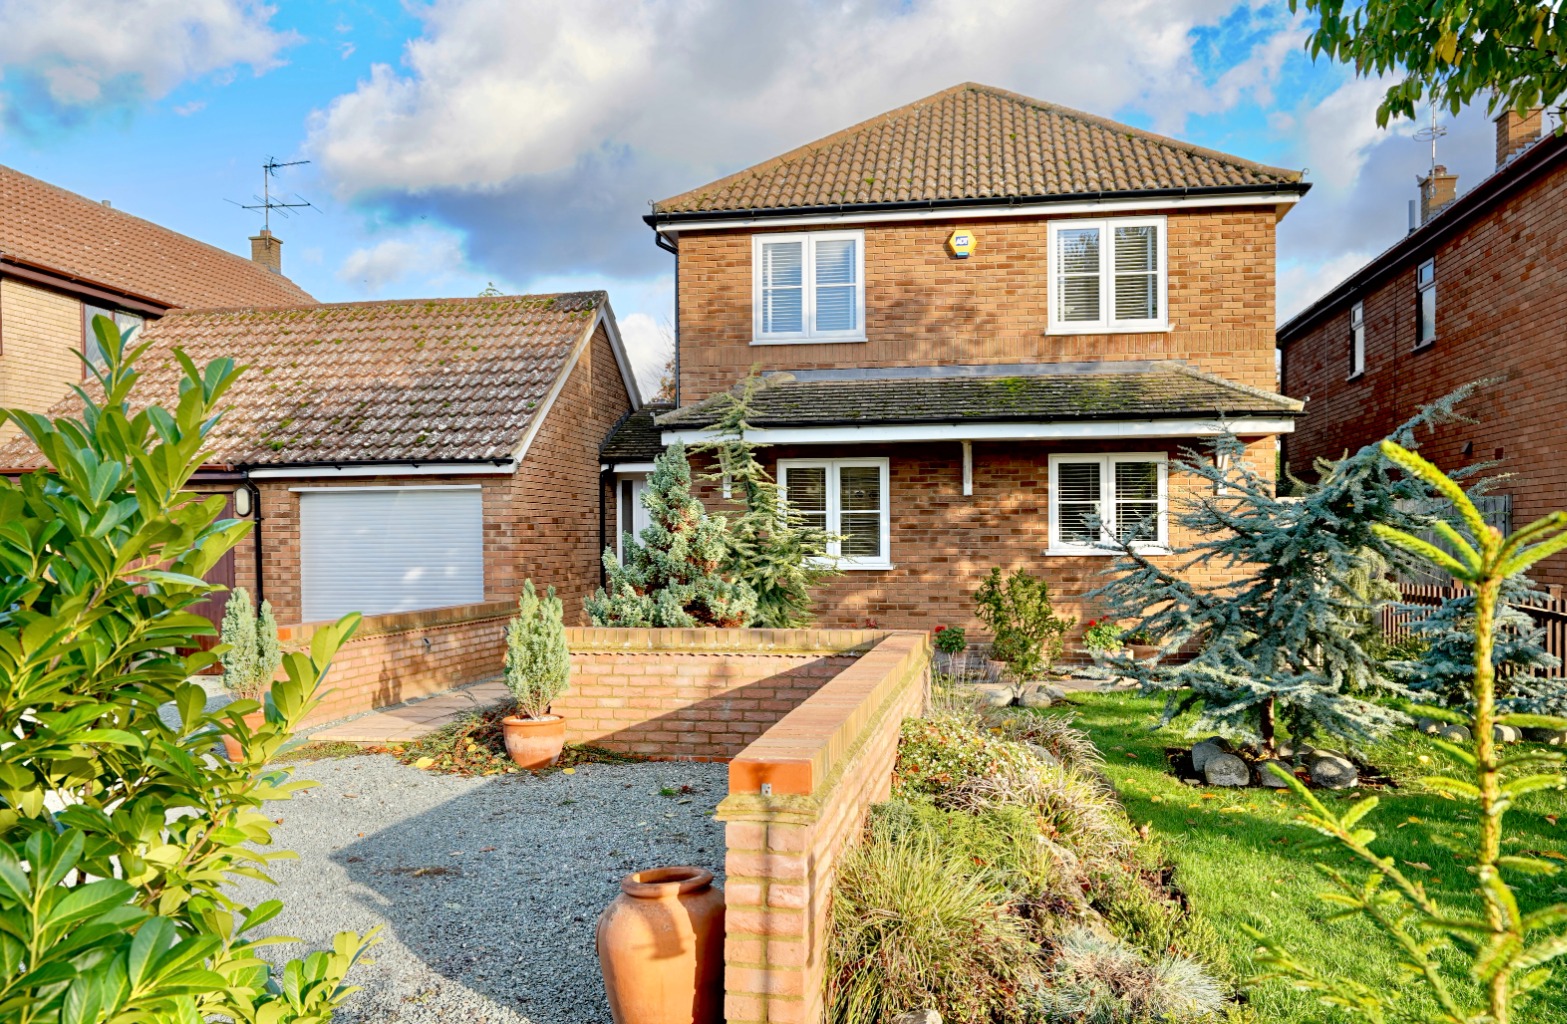 3 bed detached house for sale in High Street, St. Neots  - Property Image 1